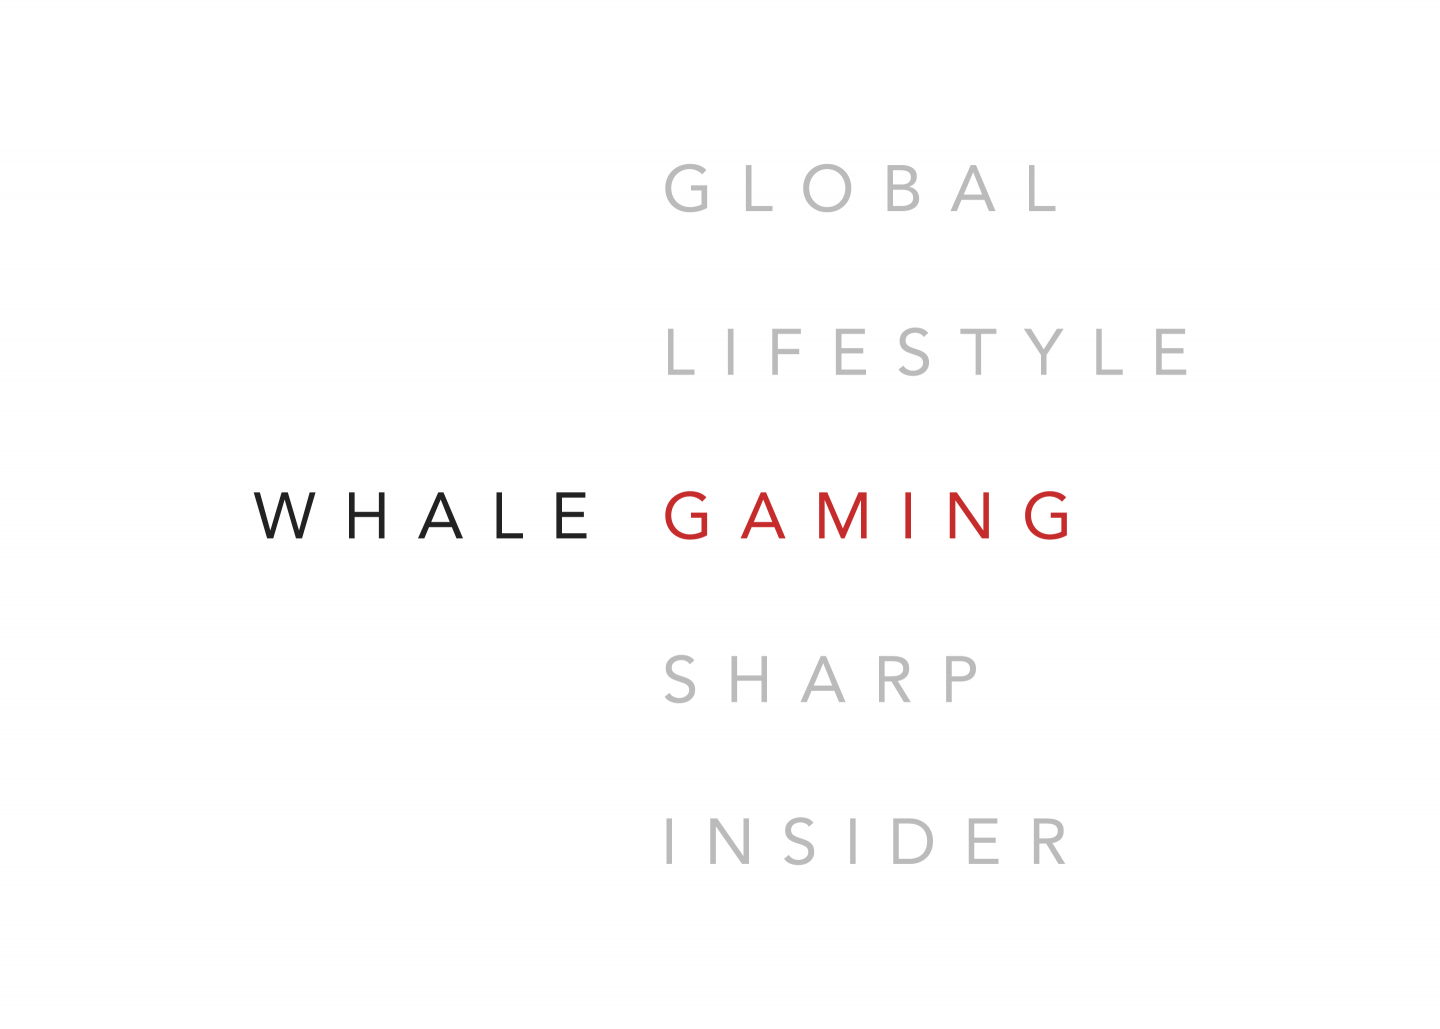 Whale Global brand identity design by Ryan Paonessa